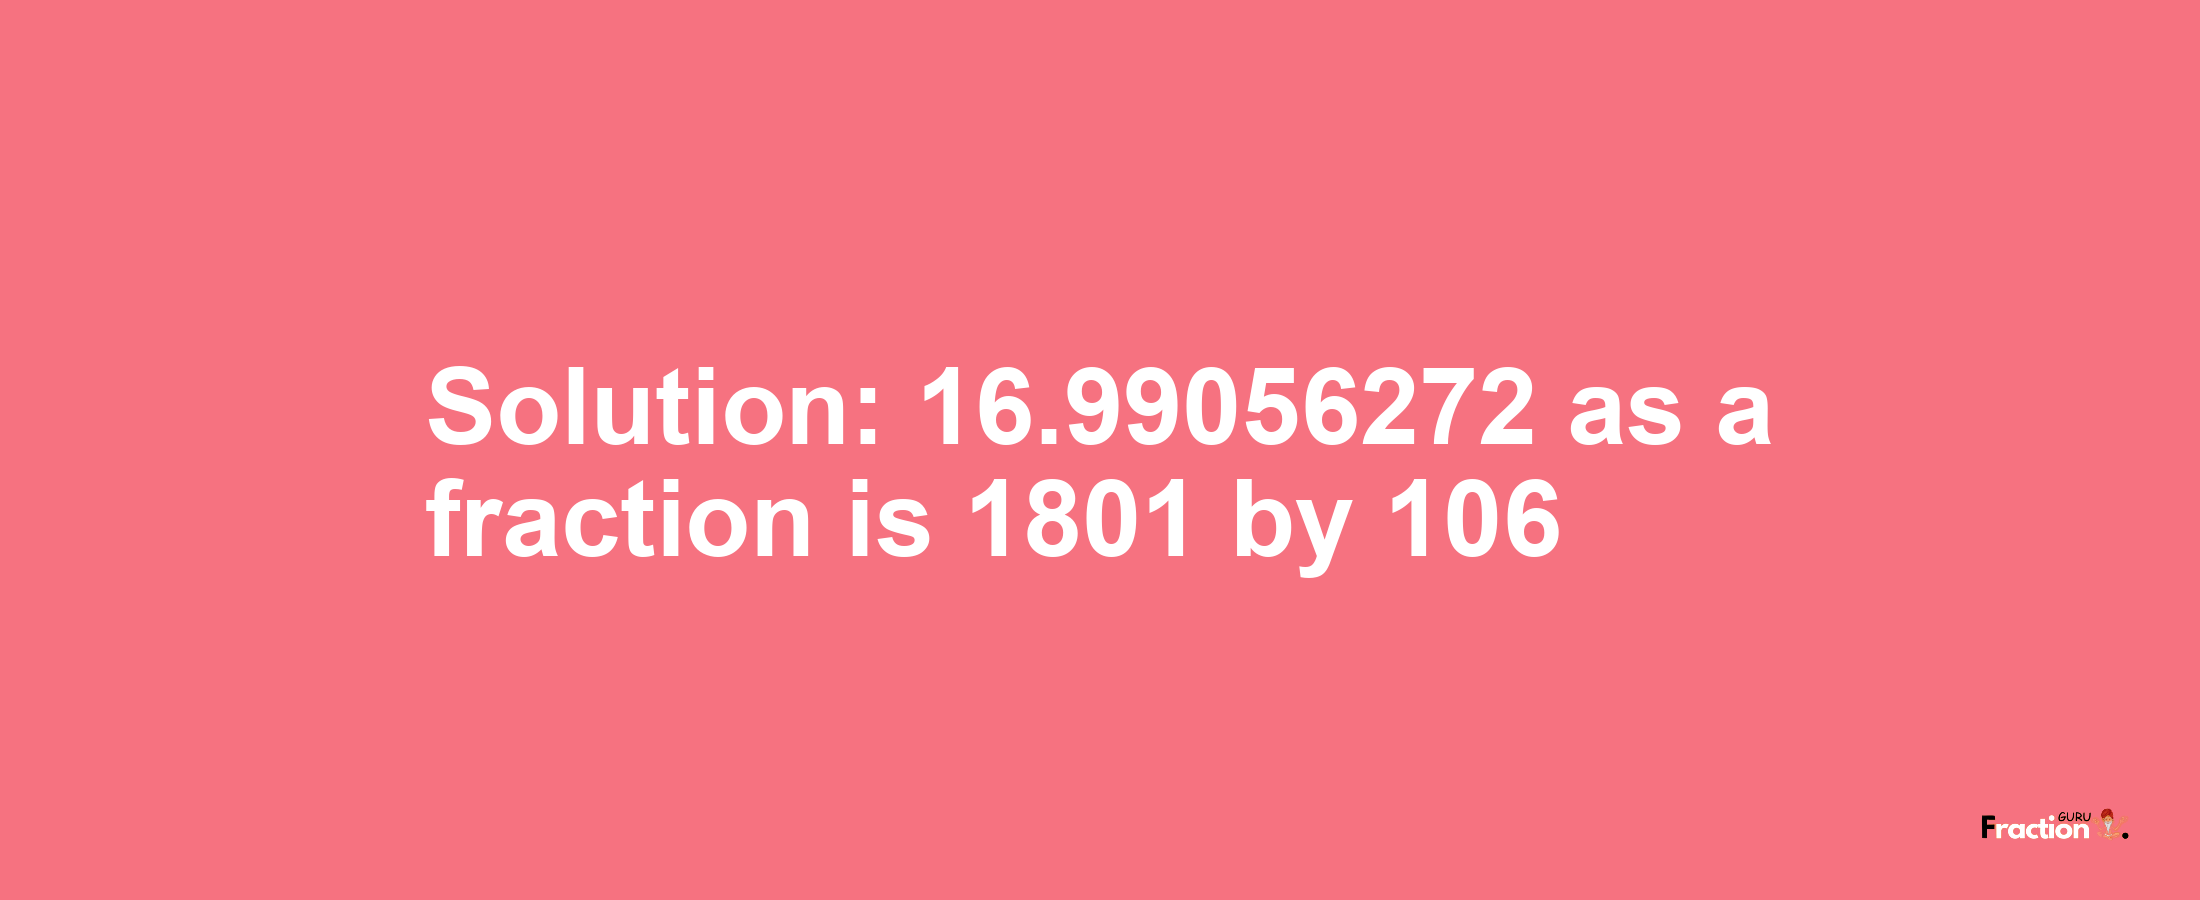 Solution:16.99056272 as a fraction is 1801/106